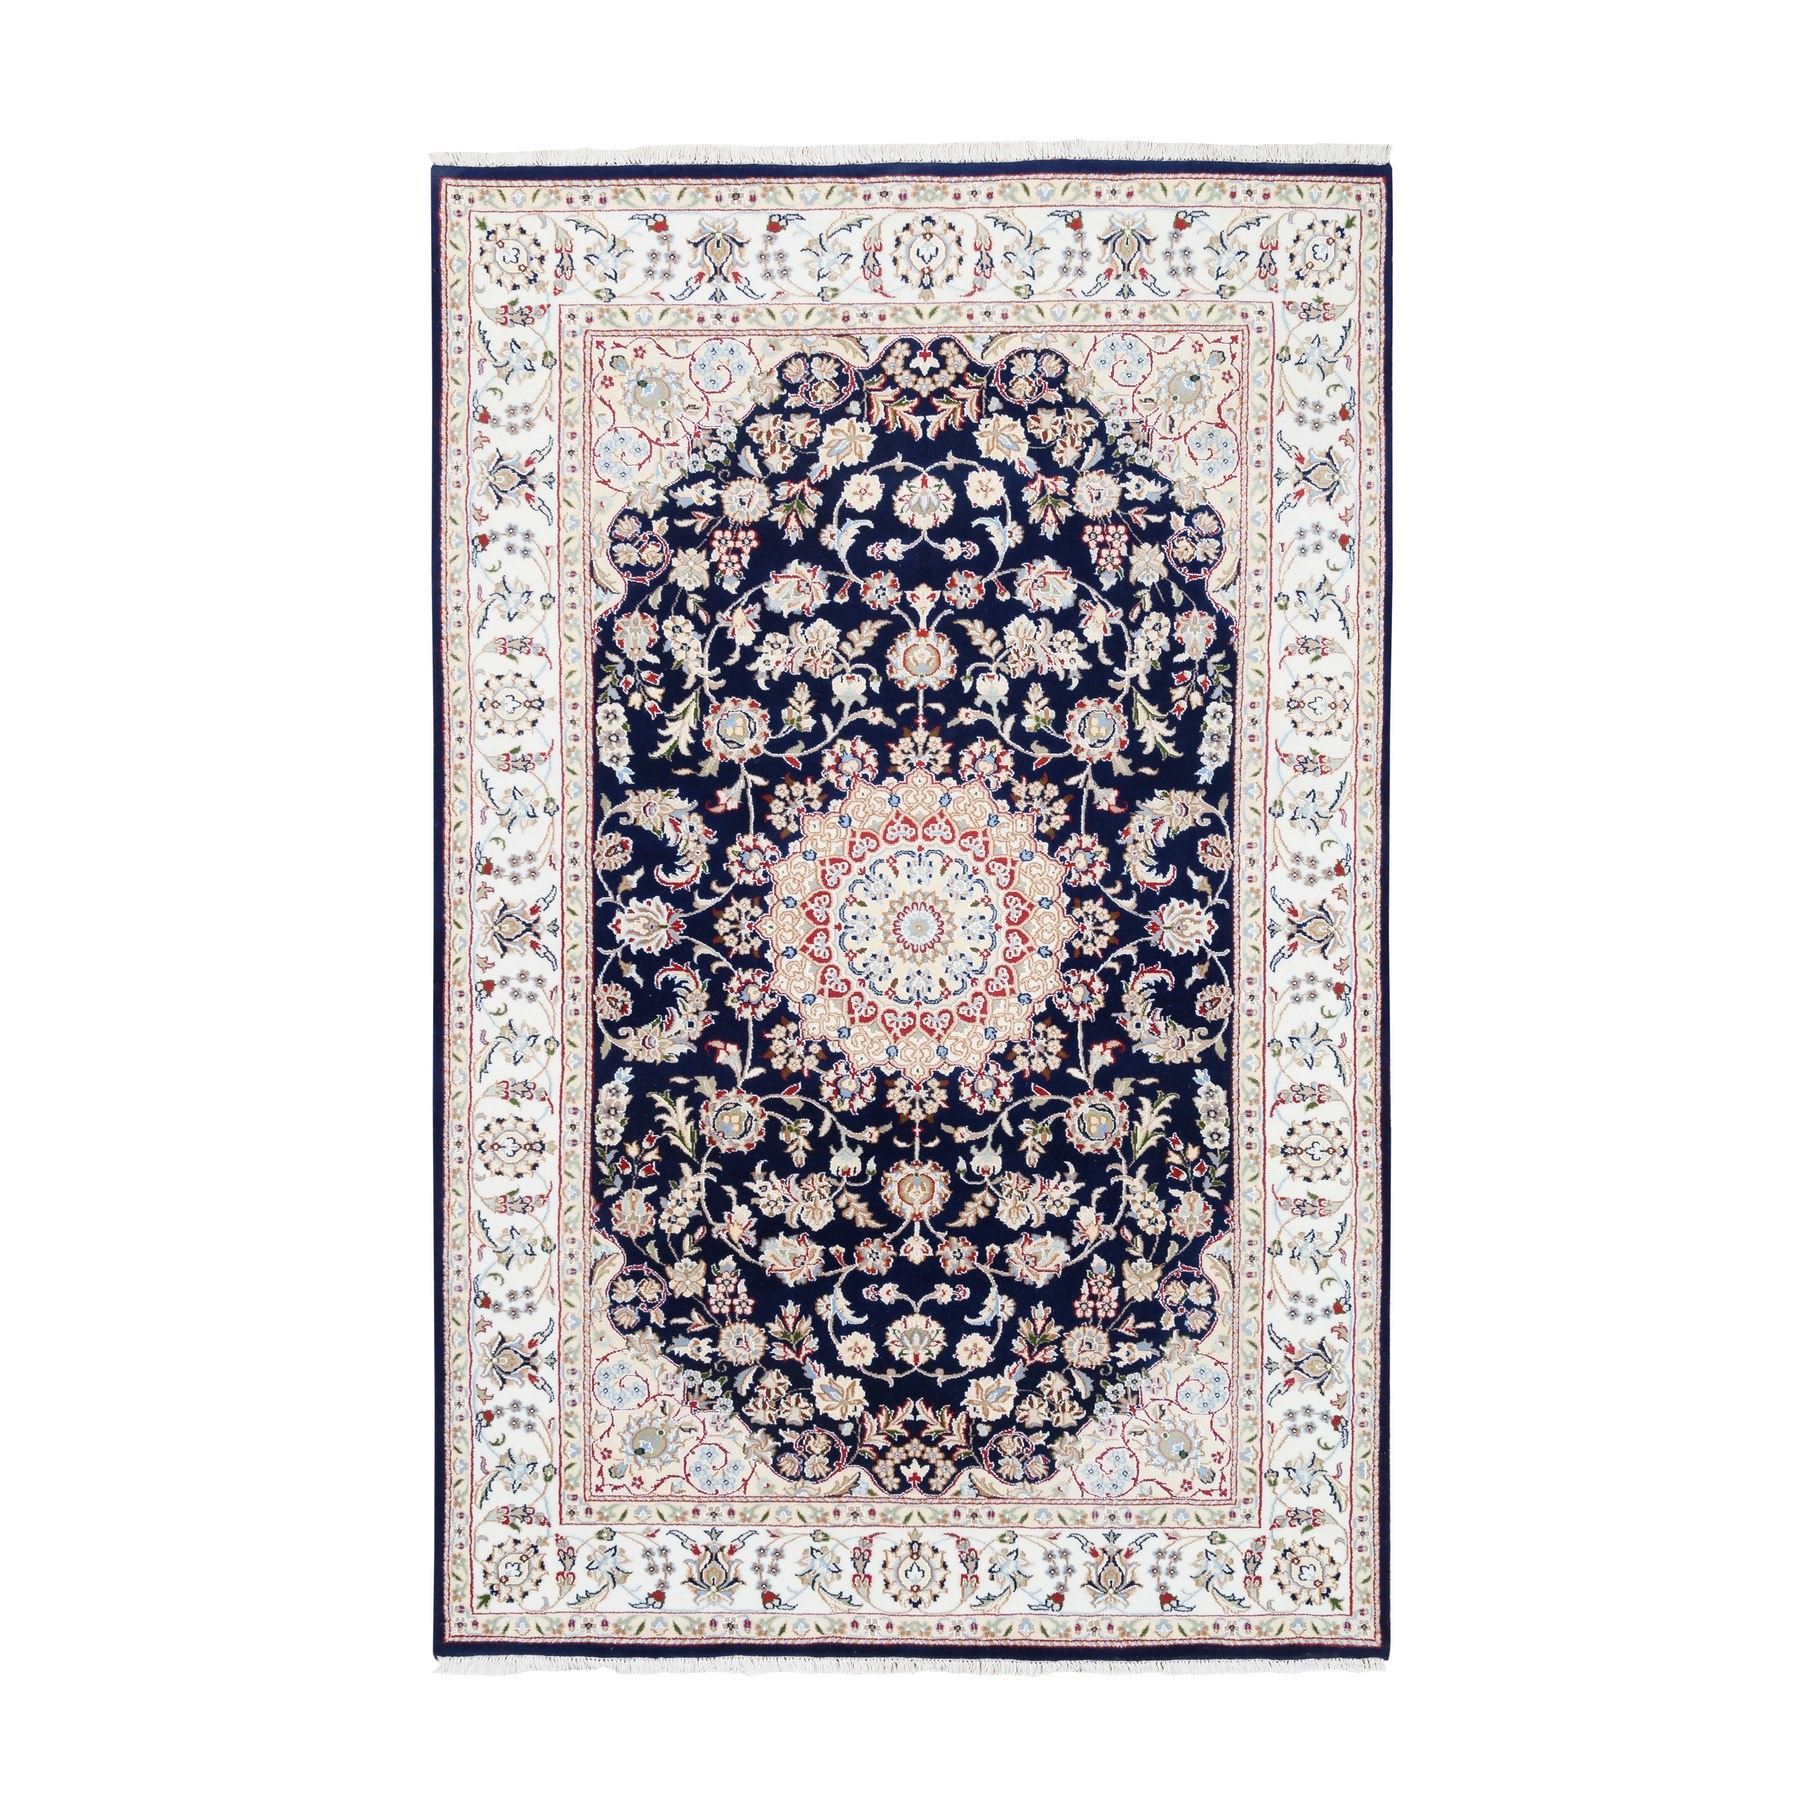 Pirniakan Collection Hand Knotted Blue Rug No: 1125556